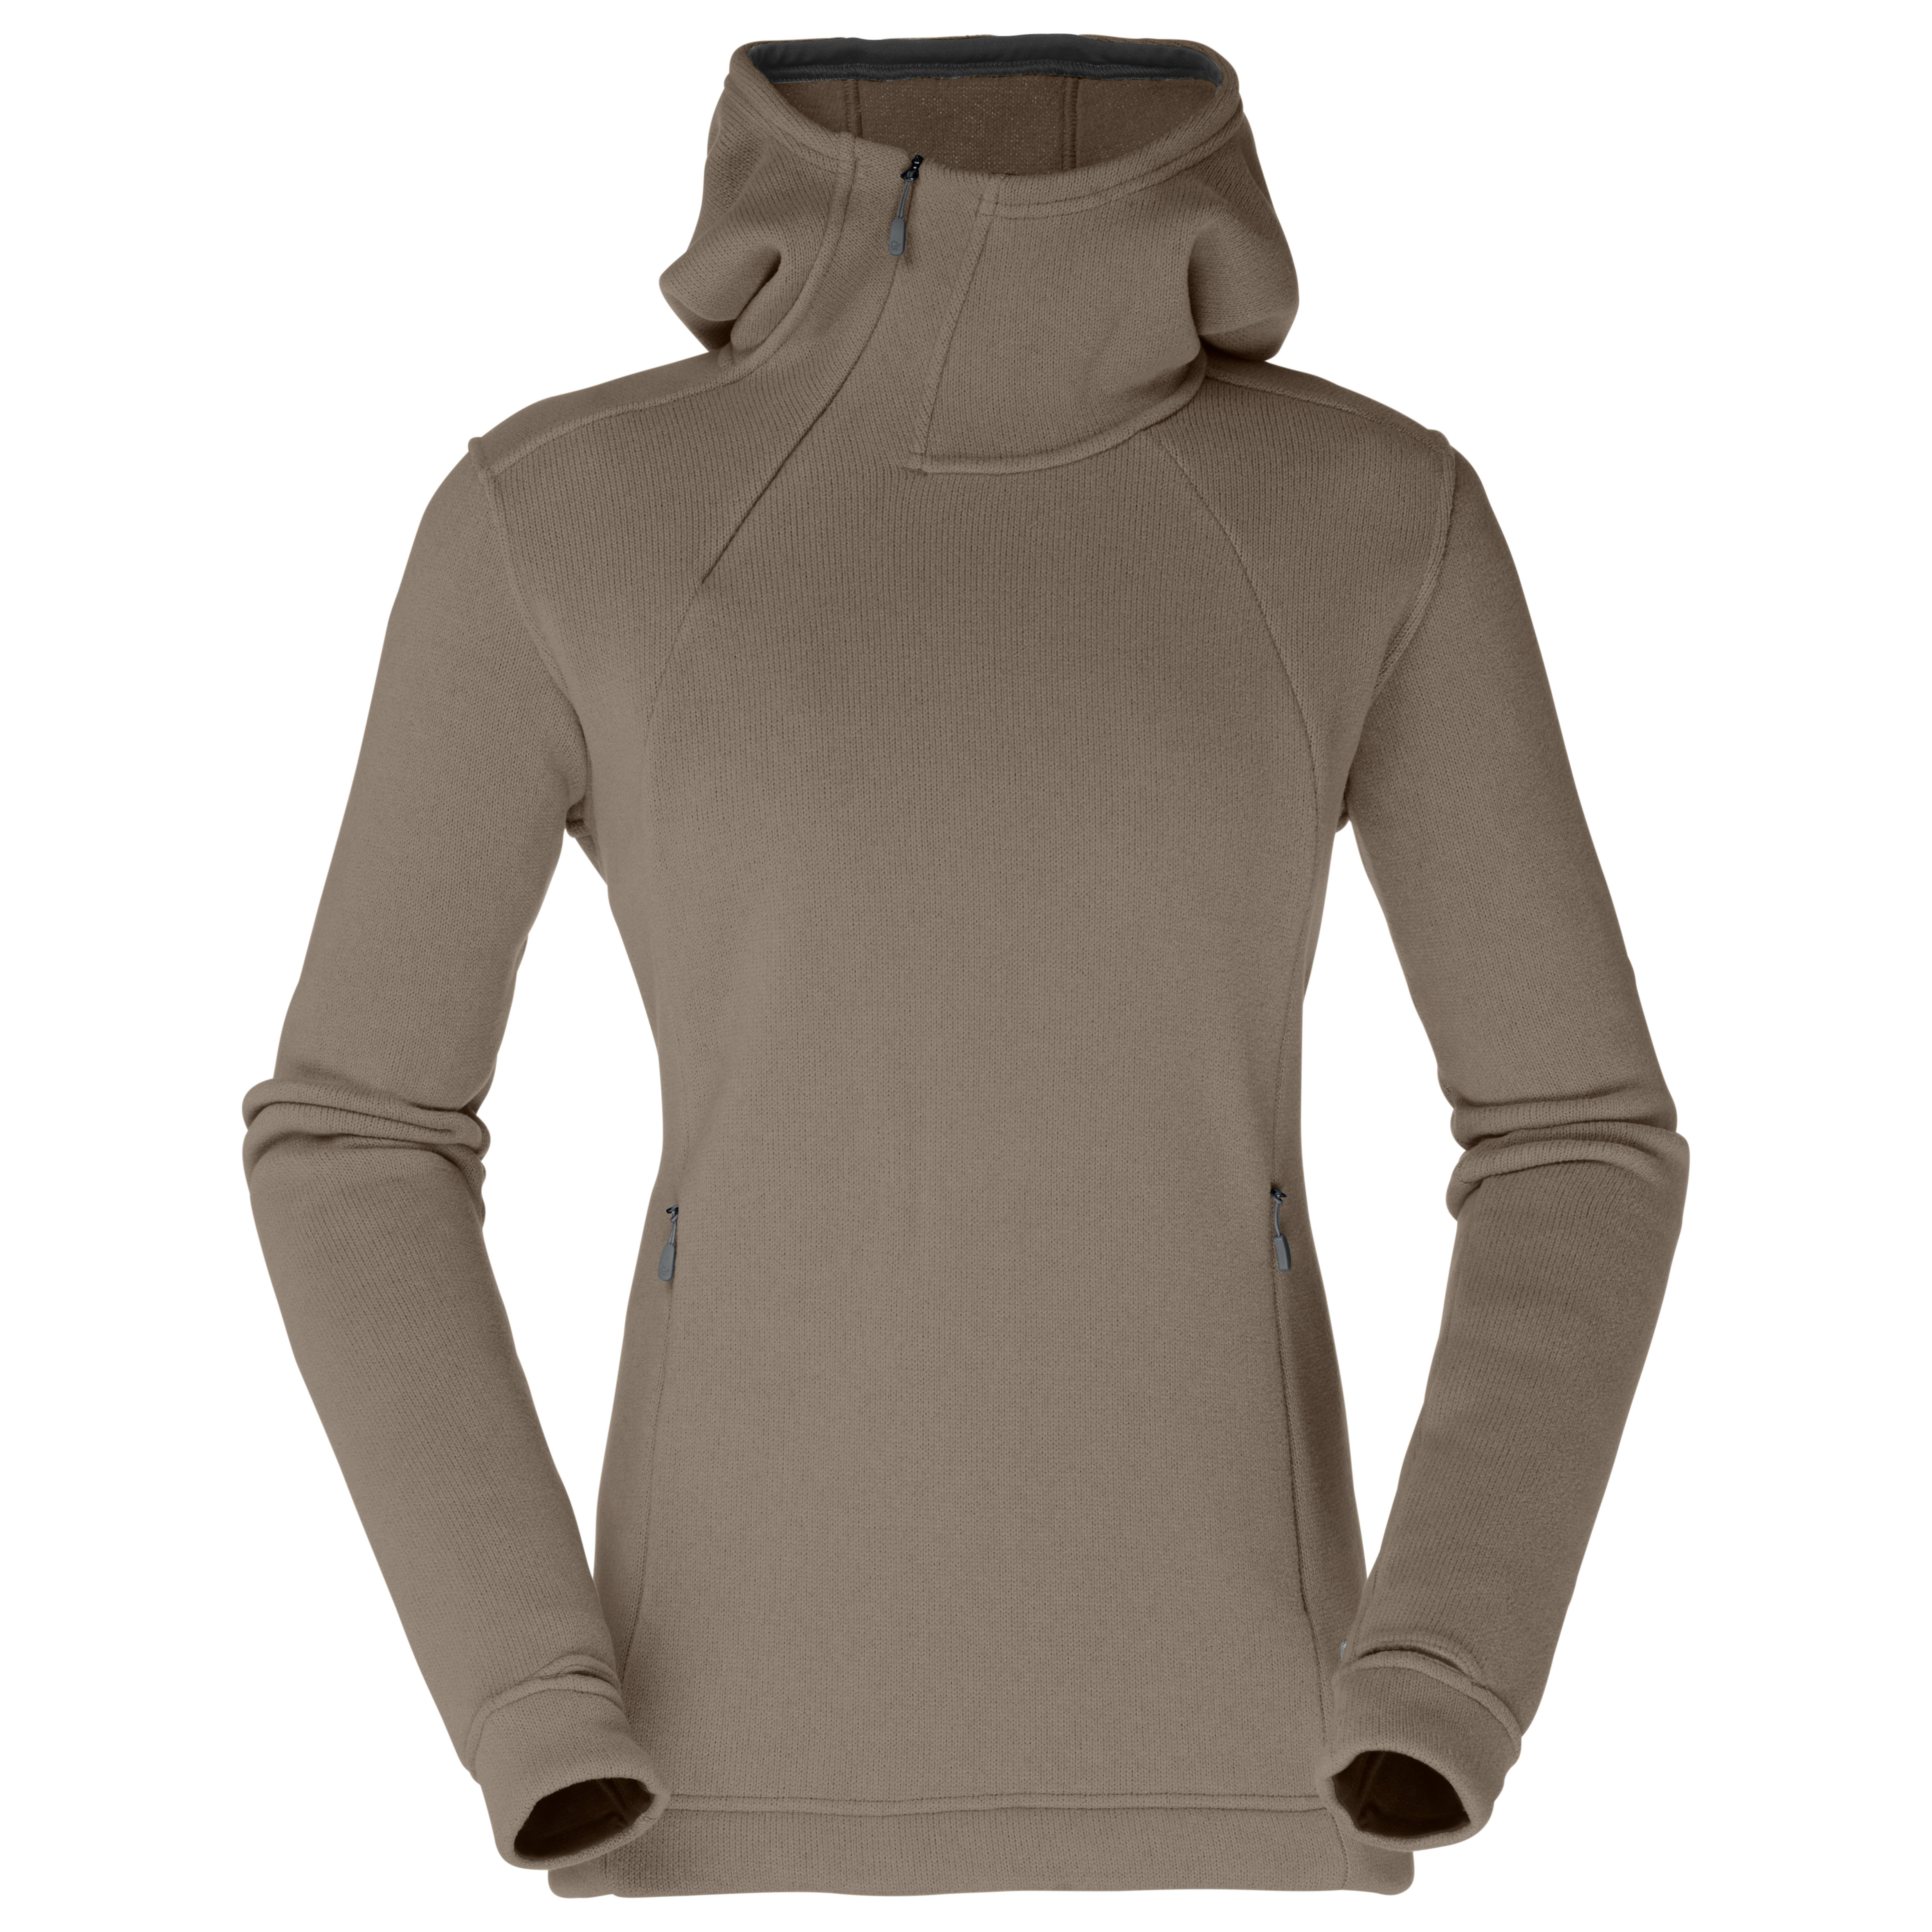 Buy Norrøna Røldal Thermal Pro Hoodie Women's from Outnorth